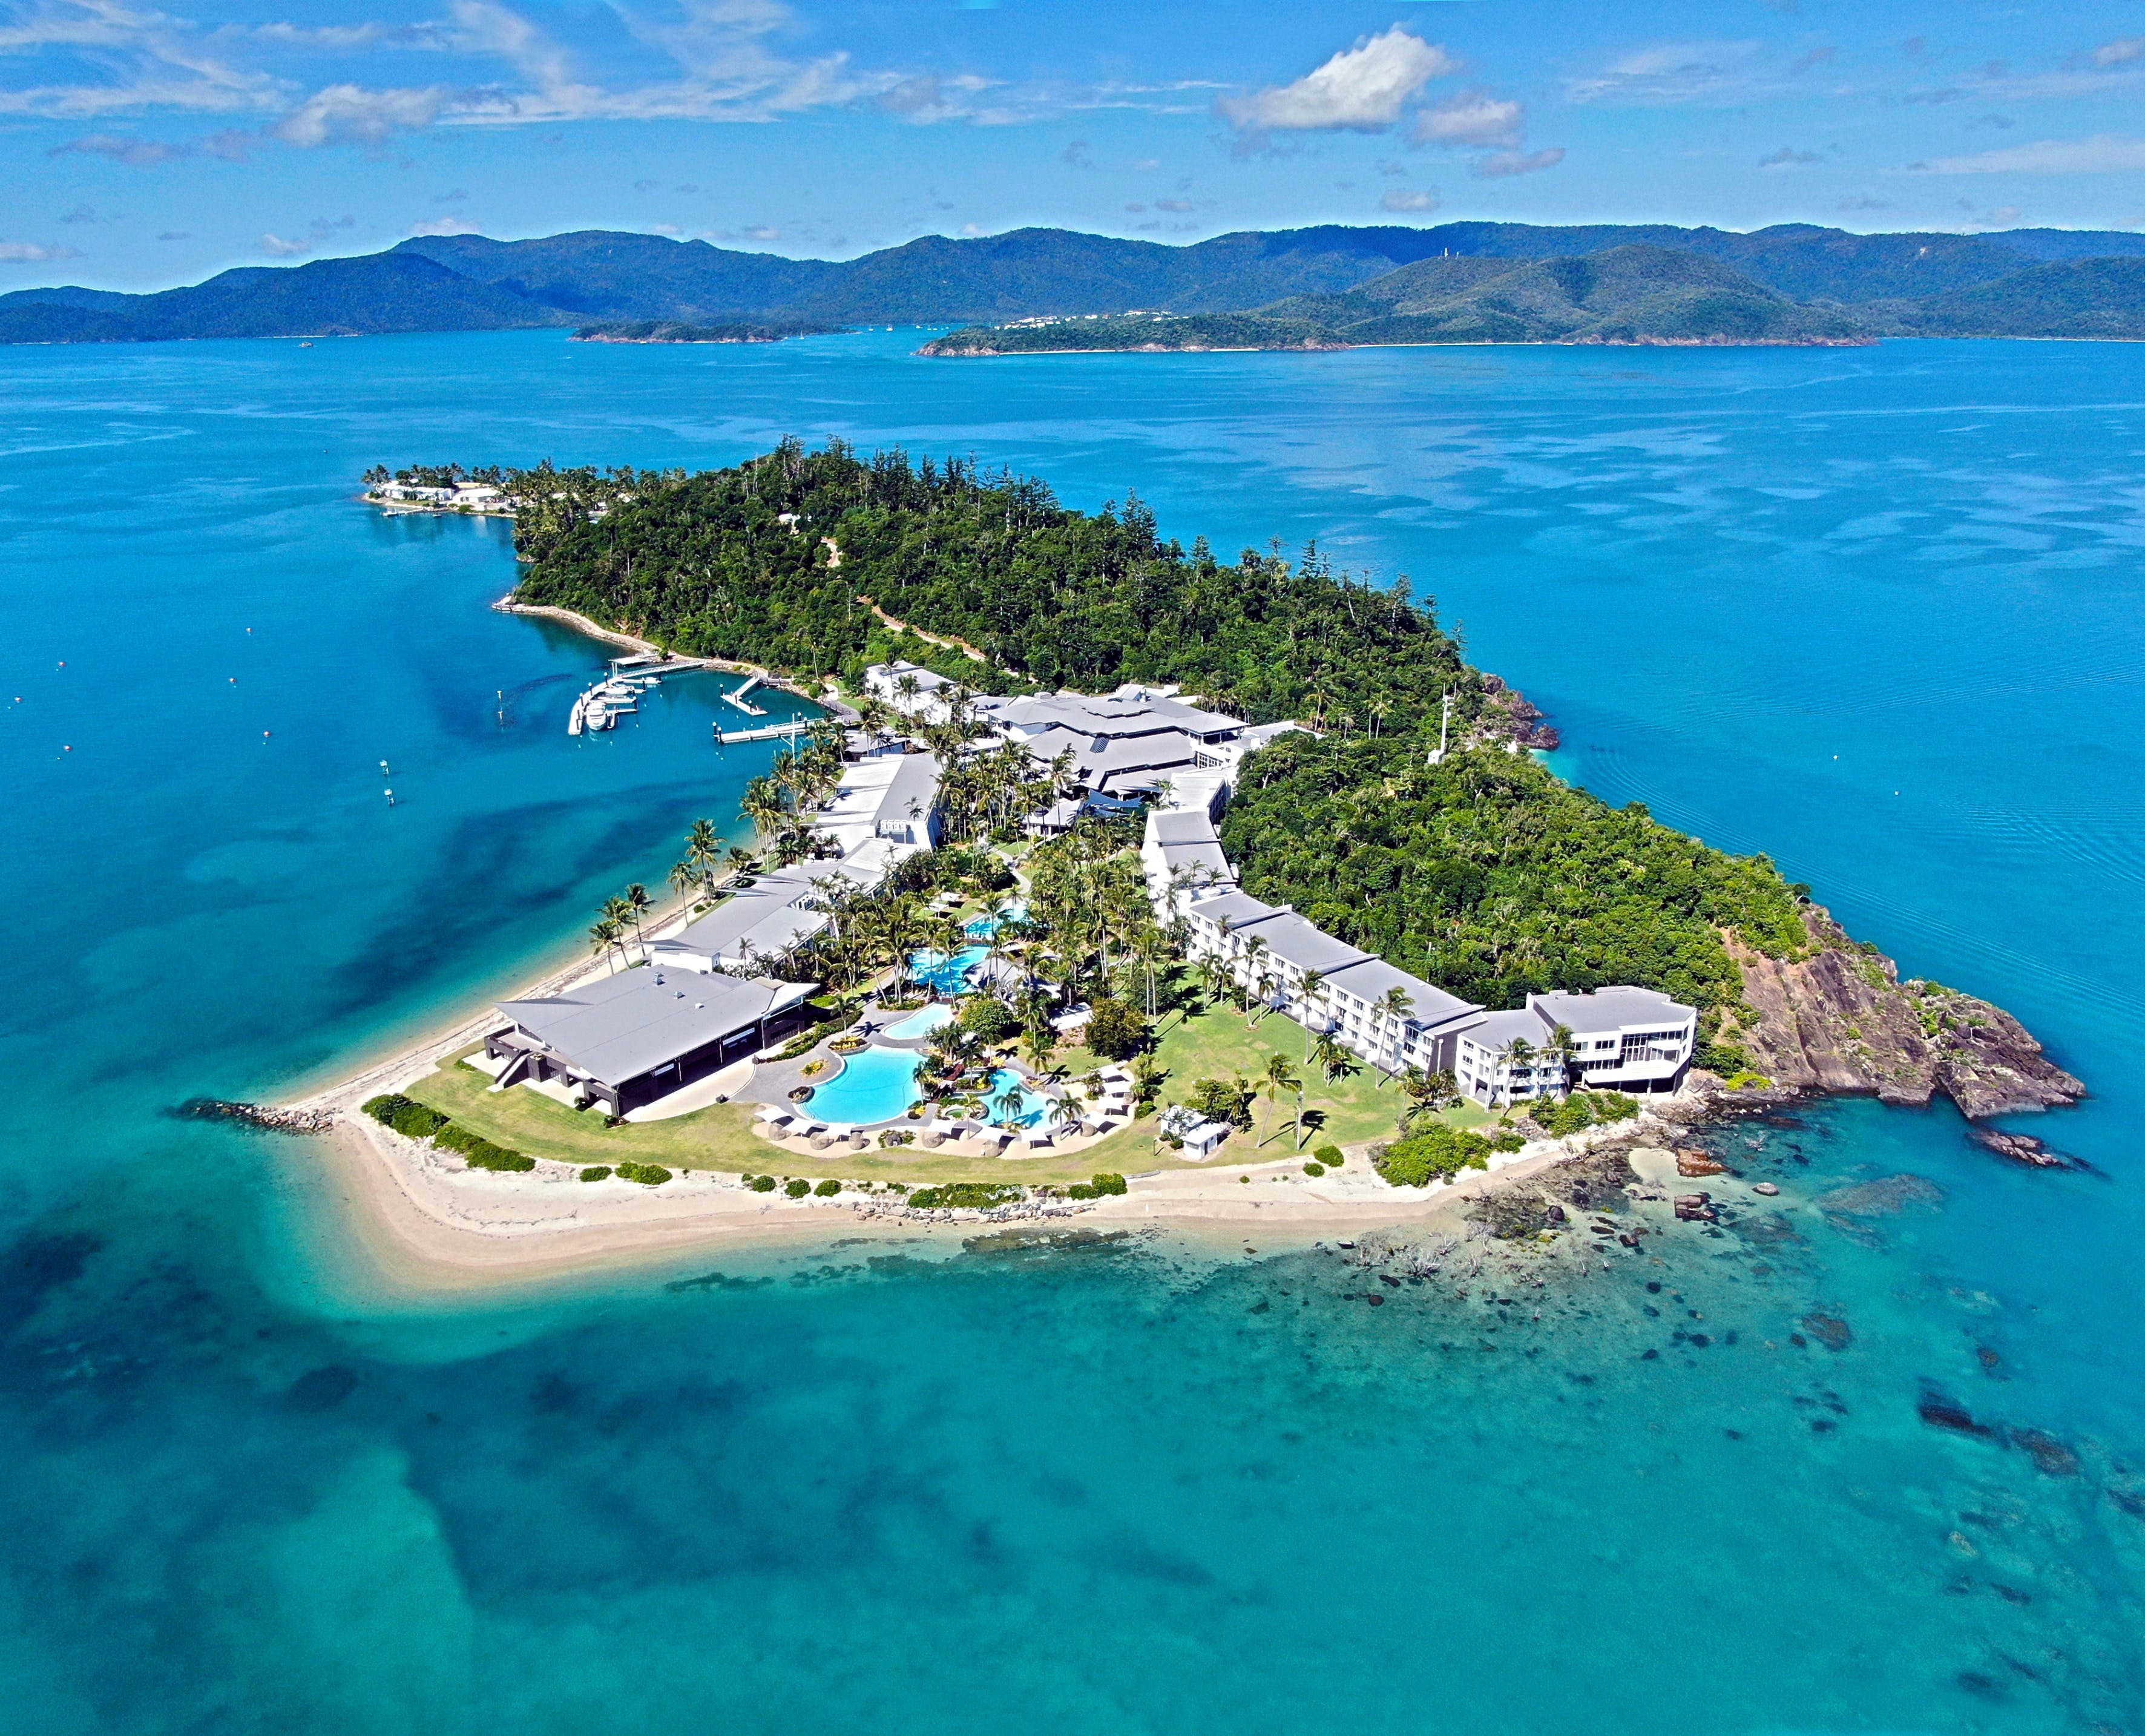 Daydream Island Resort and Living Reef - Accommodation Adelaide